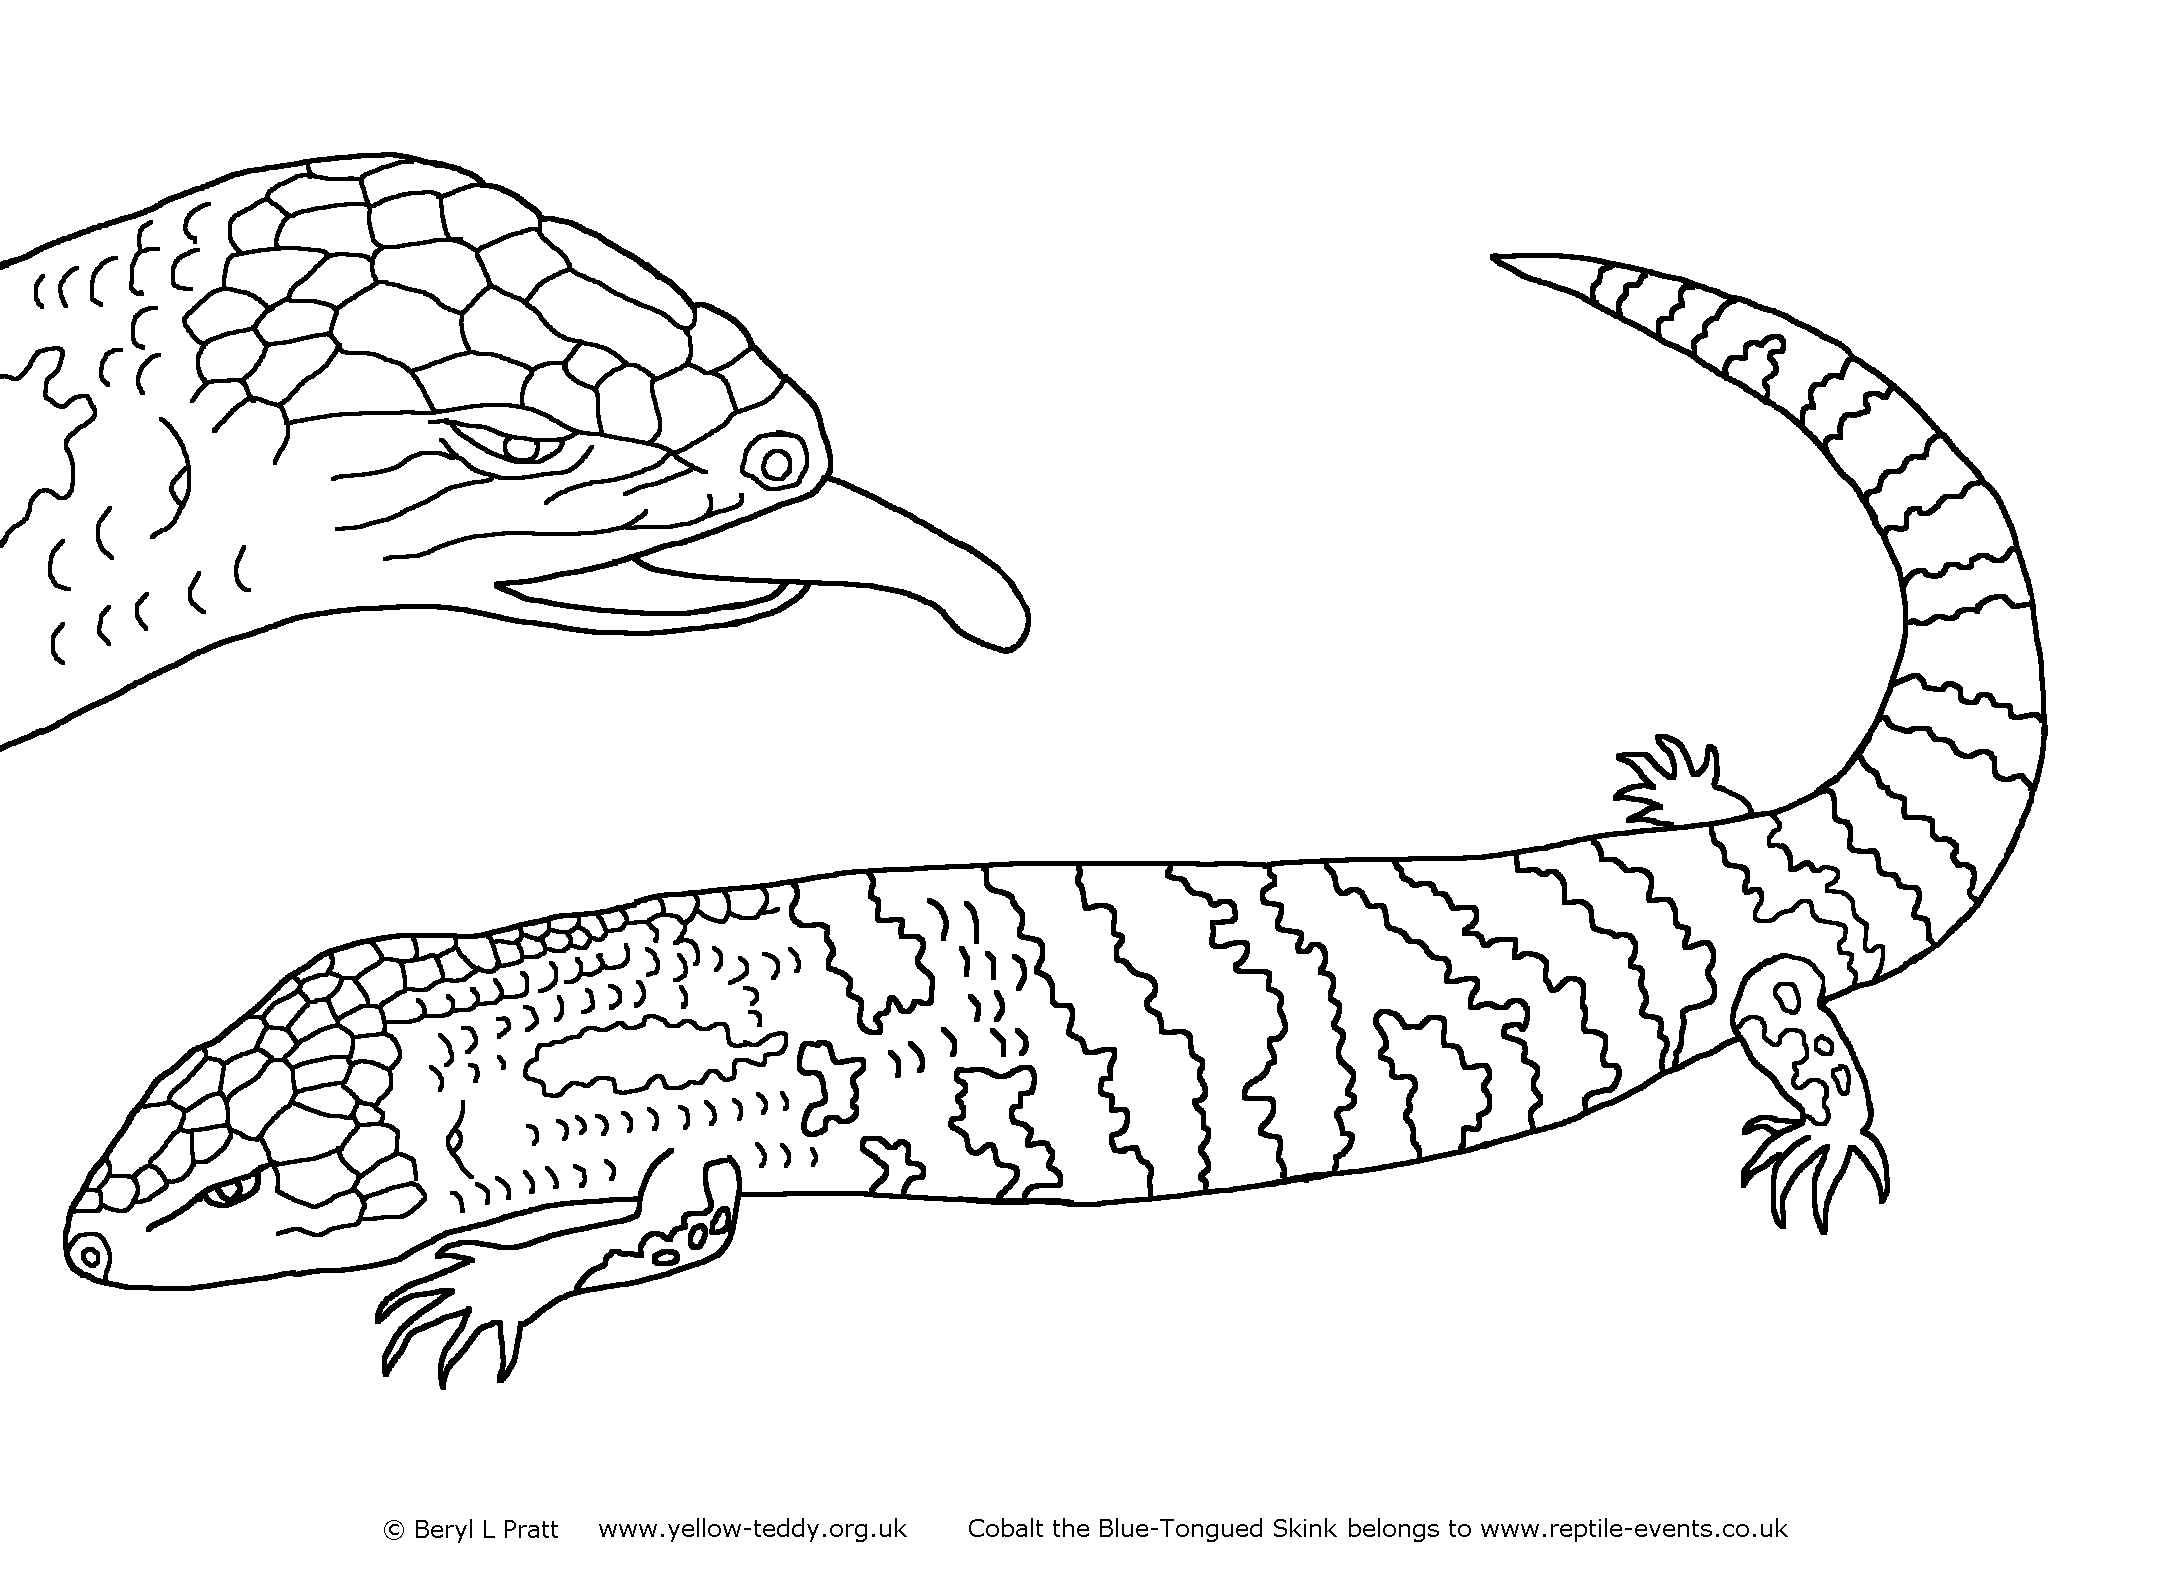 Line drawing of Cobalt the Blue-Tongued Skink